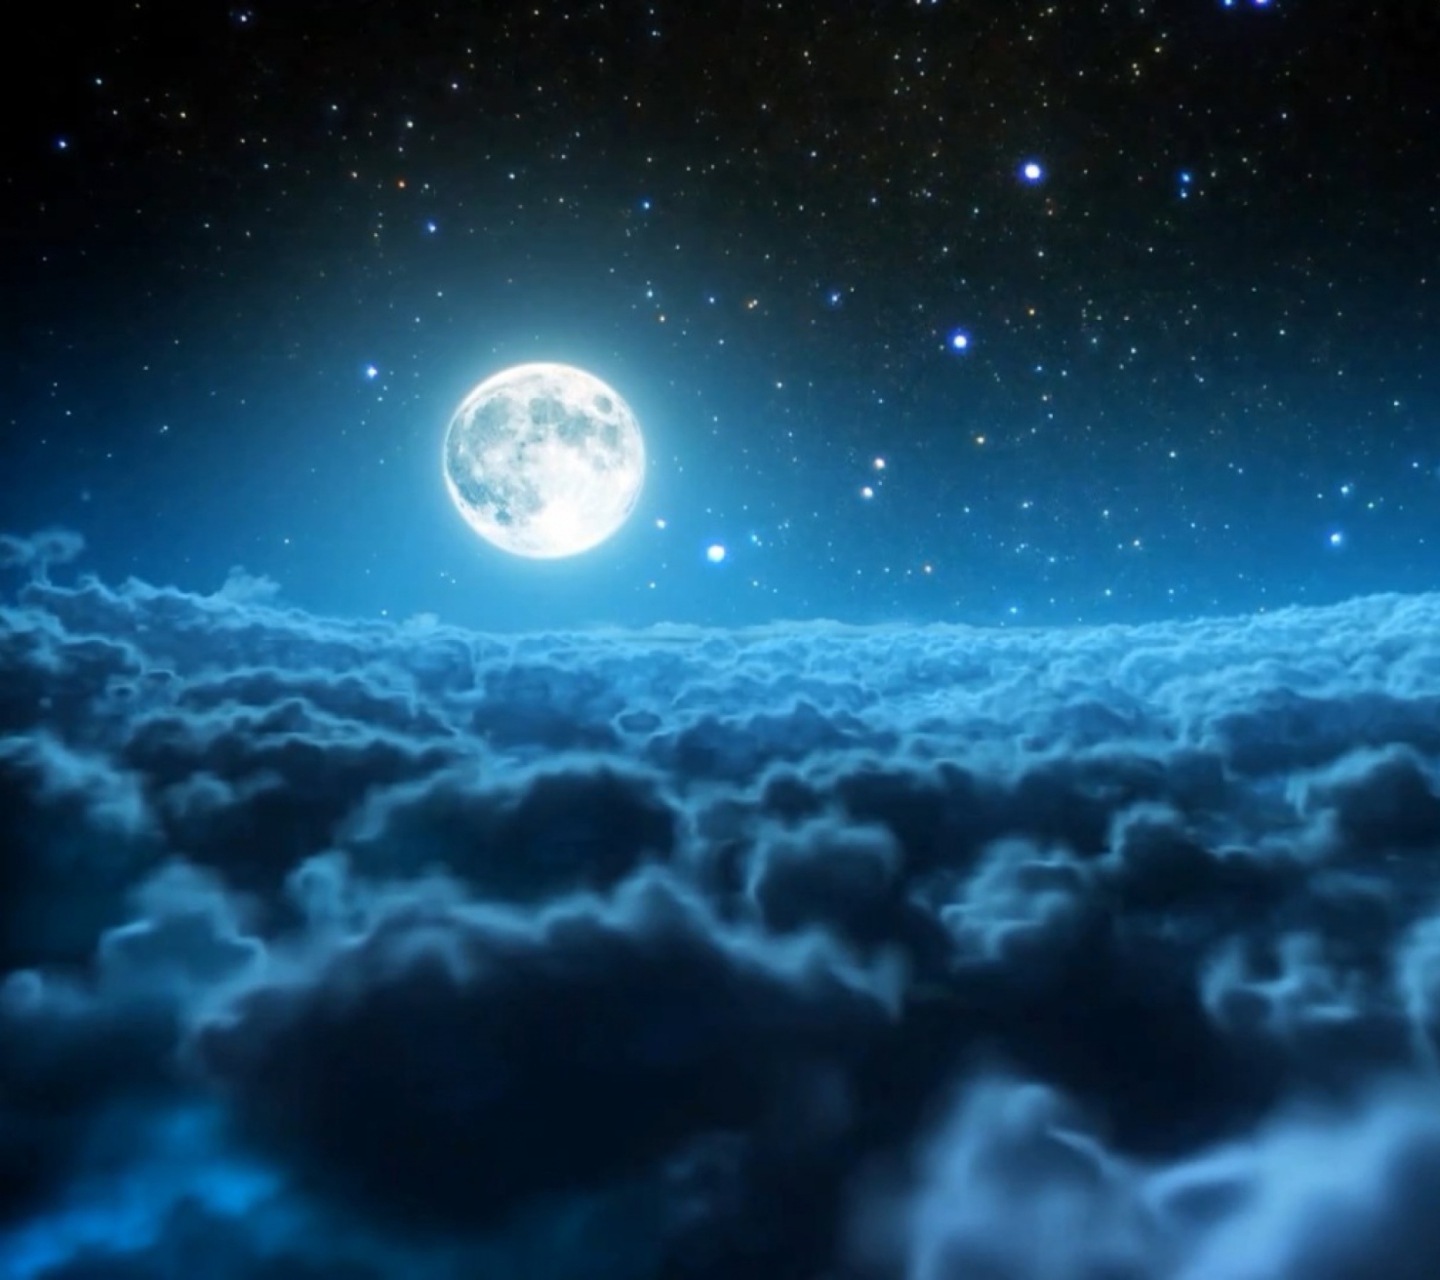 Cloudy Night And Sparkling Moon screenshot #1 1440x1280